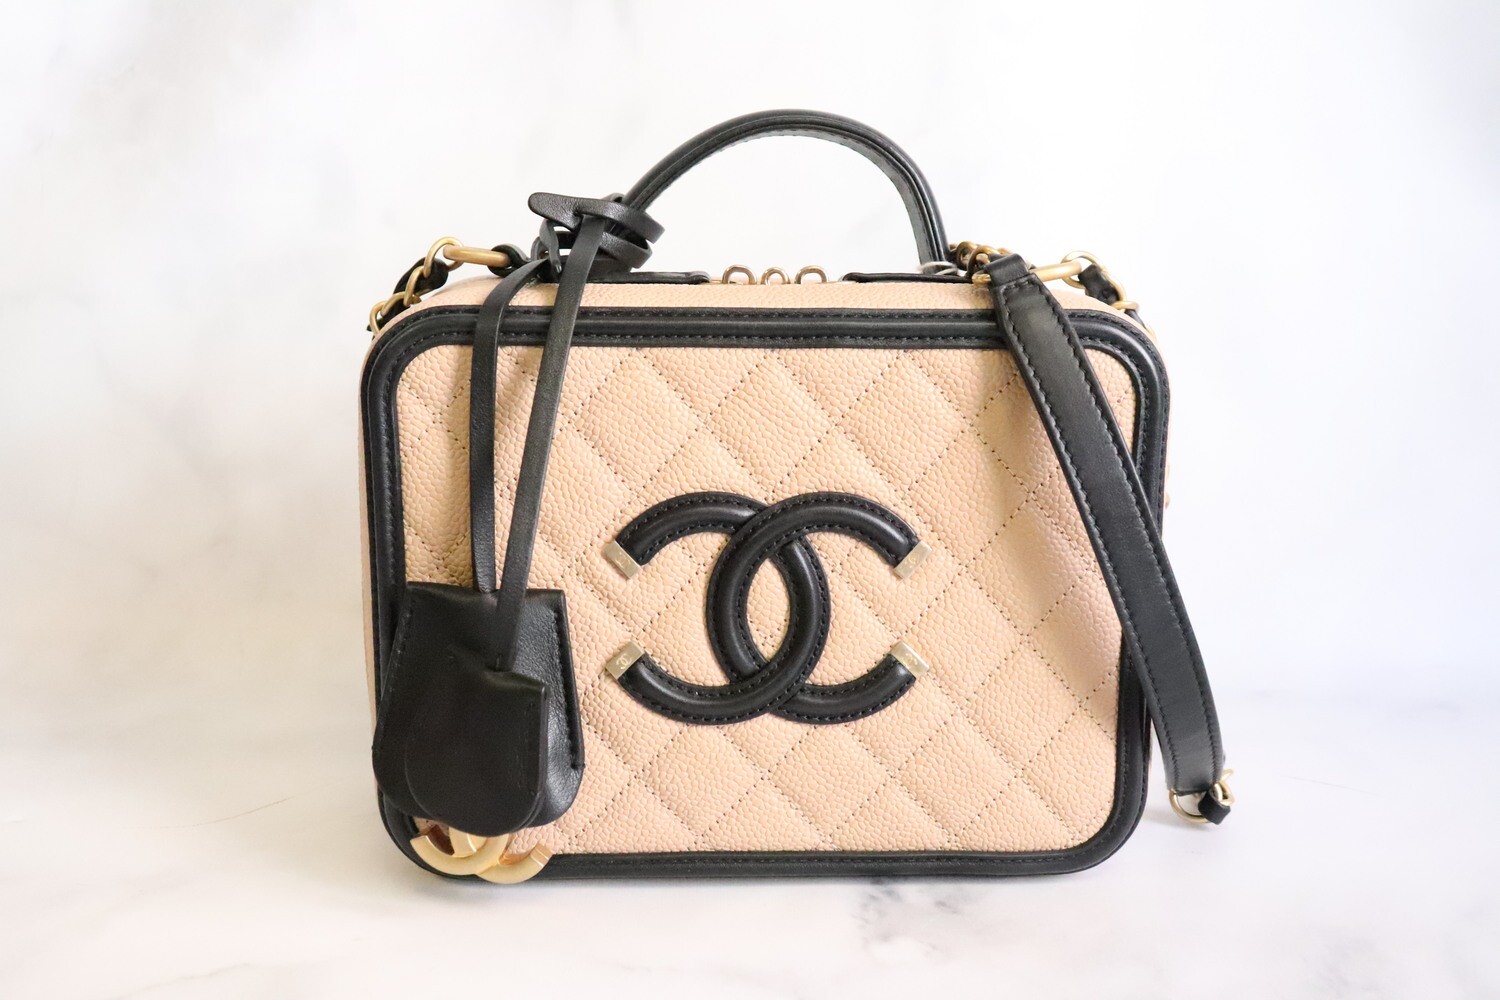 Chanel Vanity Filigree Medium, Beige Caviar Leather, Brushed Gold Hardware,  Preowned in Dustbag